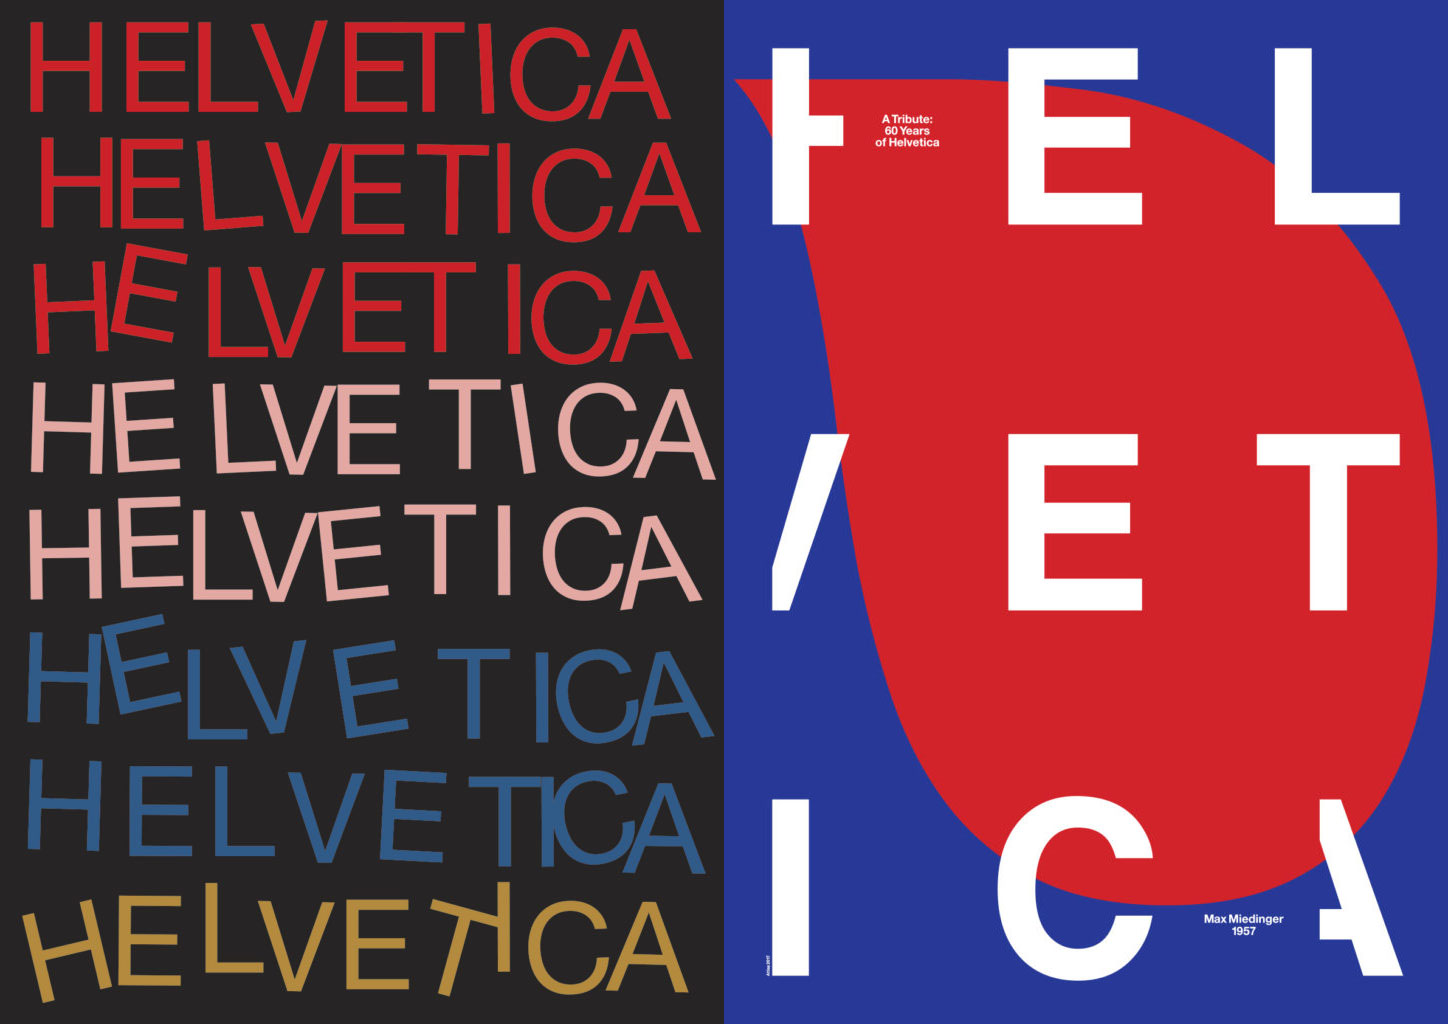 From right: Hey Studio and Atlas's Helvetica posters, commissioned to mark the typeface's 60th birthday. 
All images courtesy of 60helvetica.com.